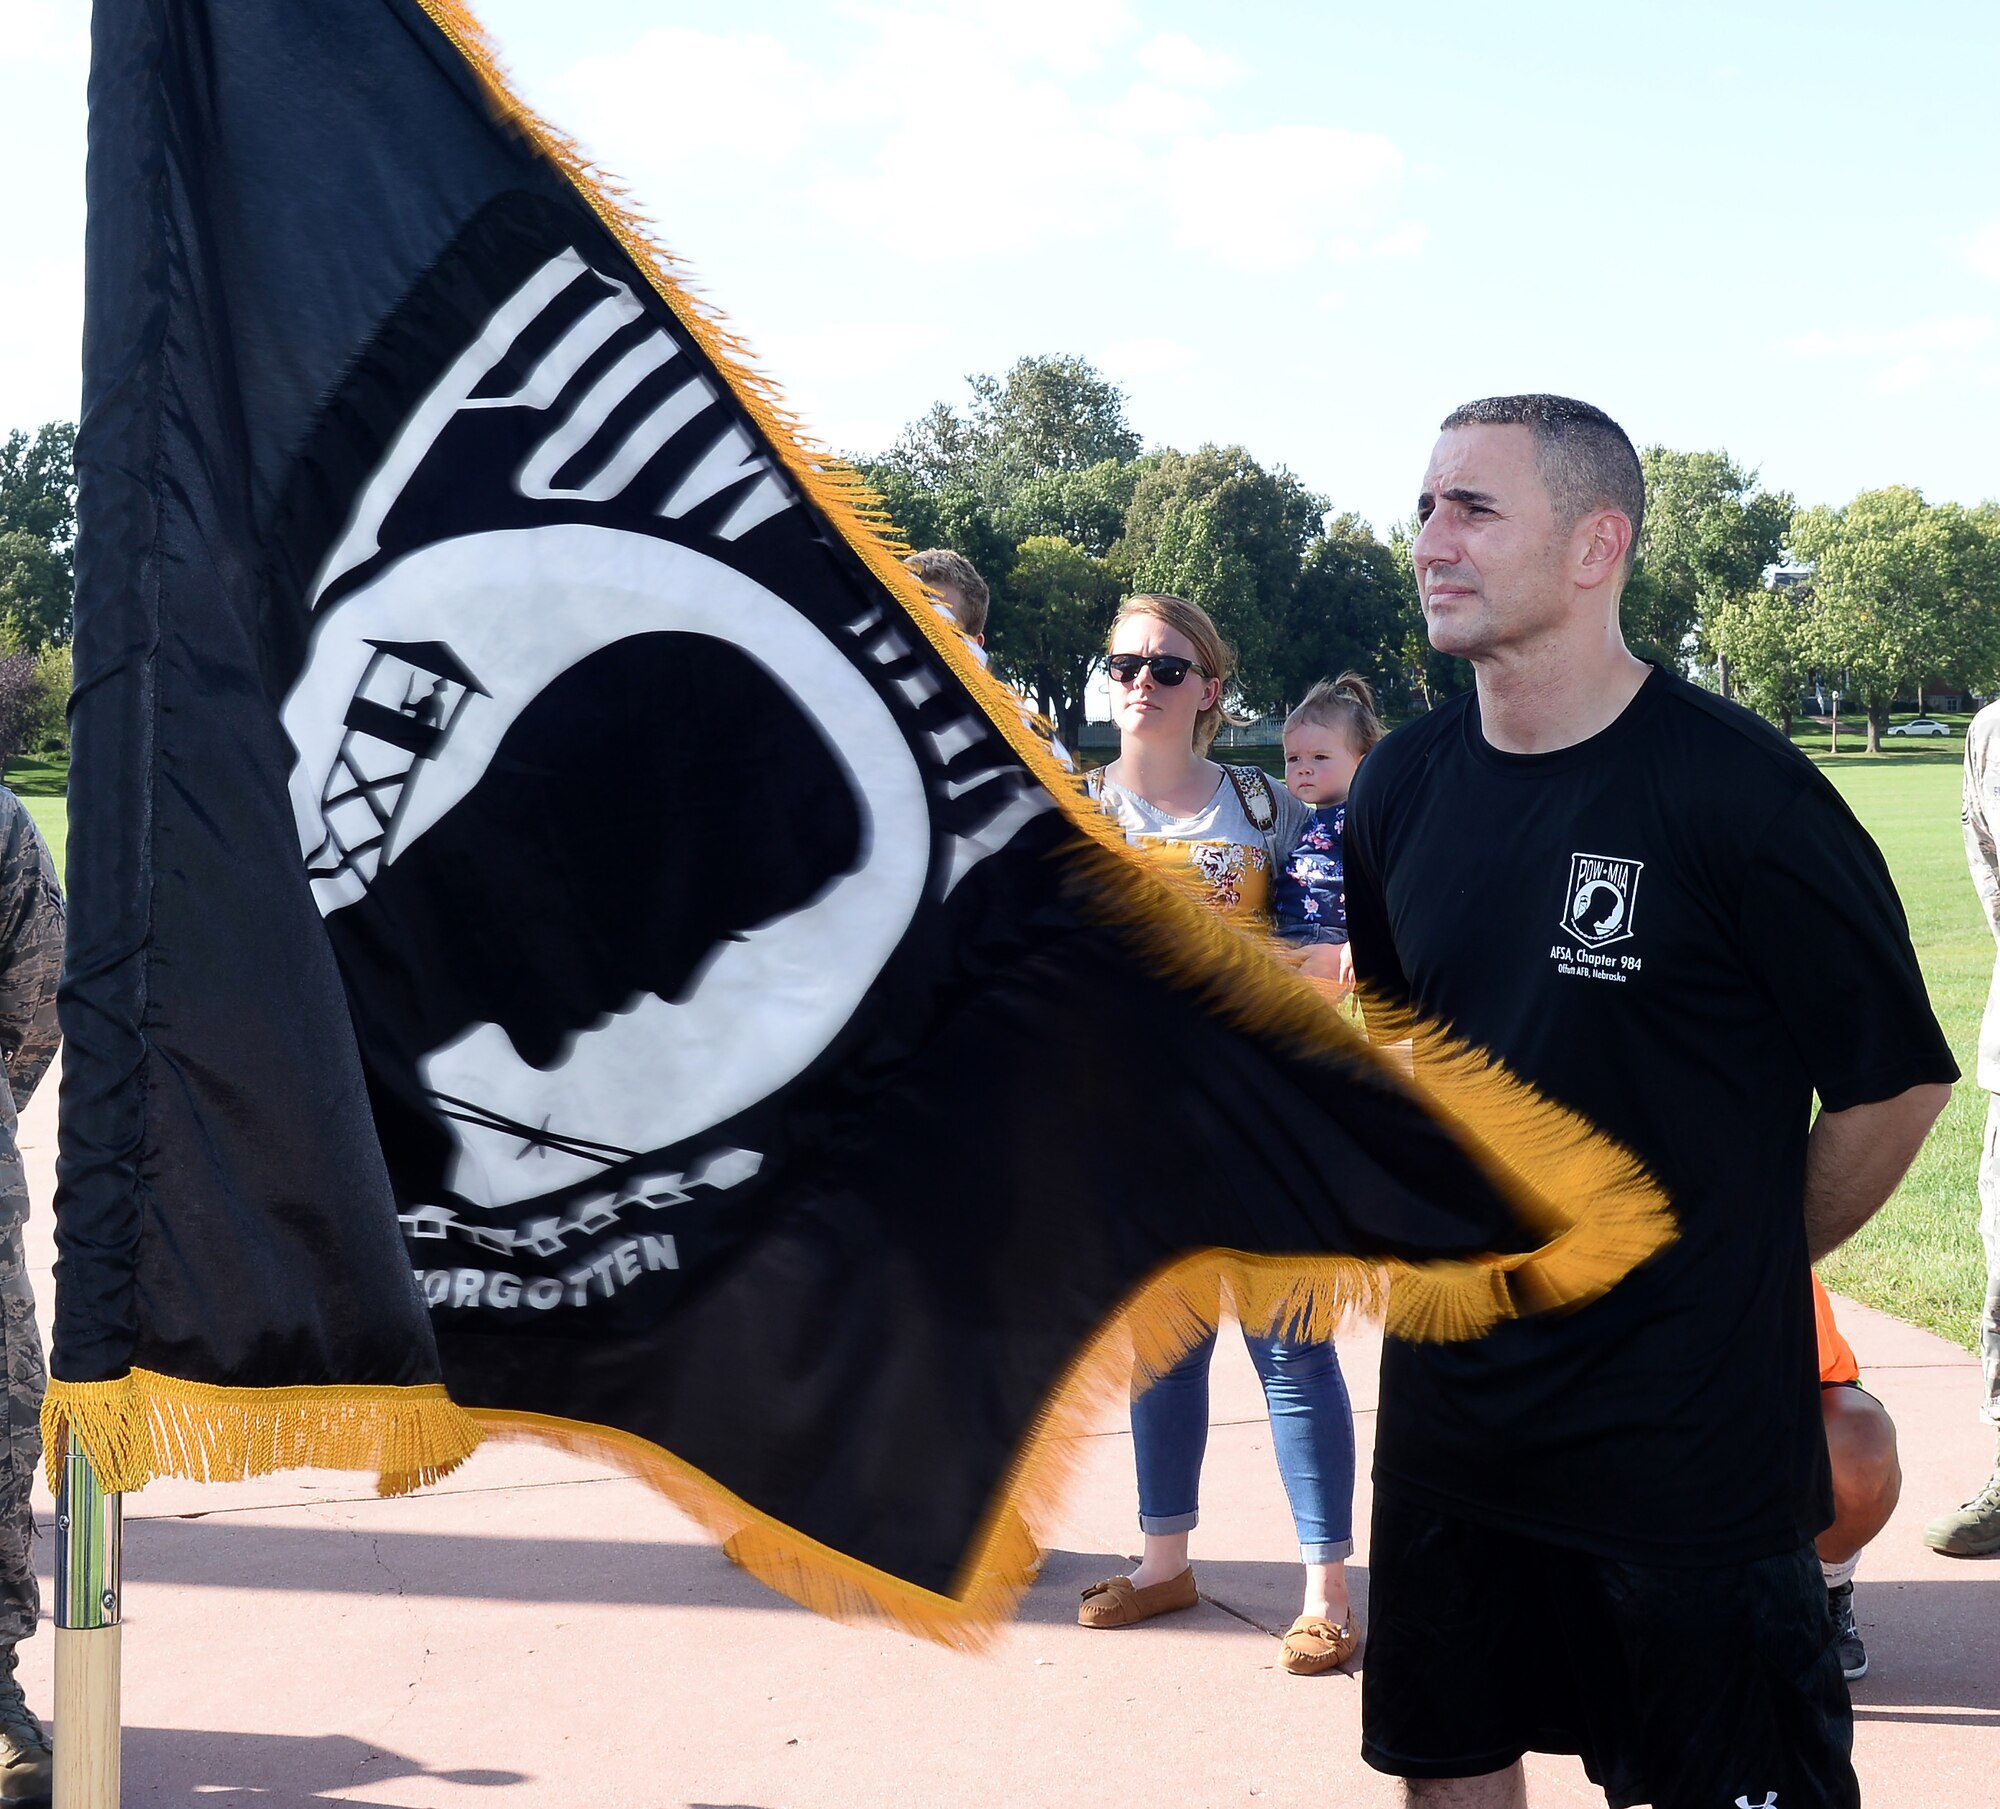 Chief Master Sgt. Brian Kruzelnick, 55th Wing command chief, listens to U.S. Air Force Colonel Michael Manion, 55th Wing commander, give opening remarks, during the POW/MIA 24-Hour Vigil Run Sept. 14, 2018, at Offutt Air Force Base, Nebraska. Many Americans across the United States pause on the third Friday of September each year to remember the sacrifices and service of those who were POWs as well as those who are MIA and their families. (U.S. Air Force Photo by Charles J. Haymond)